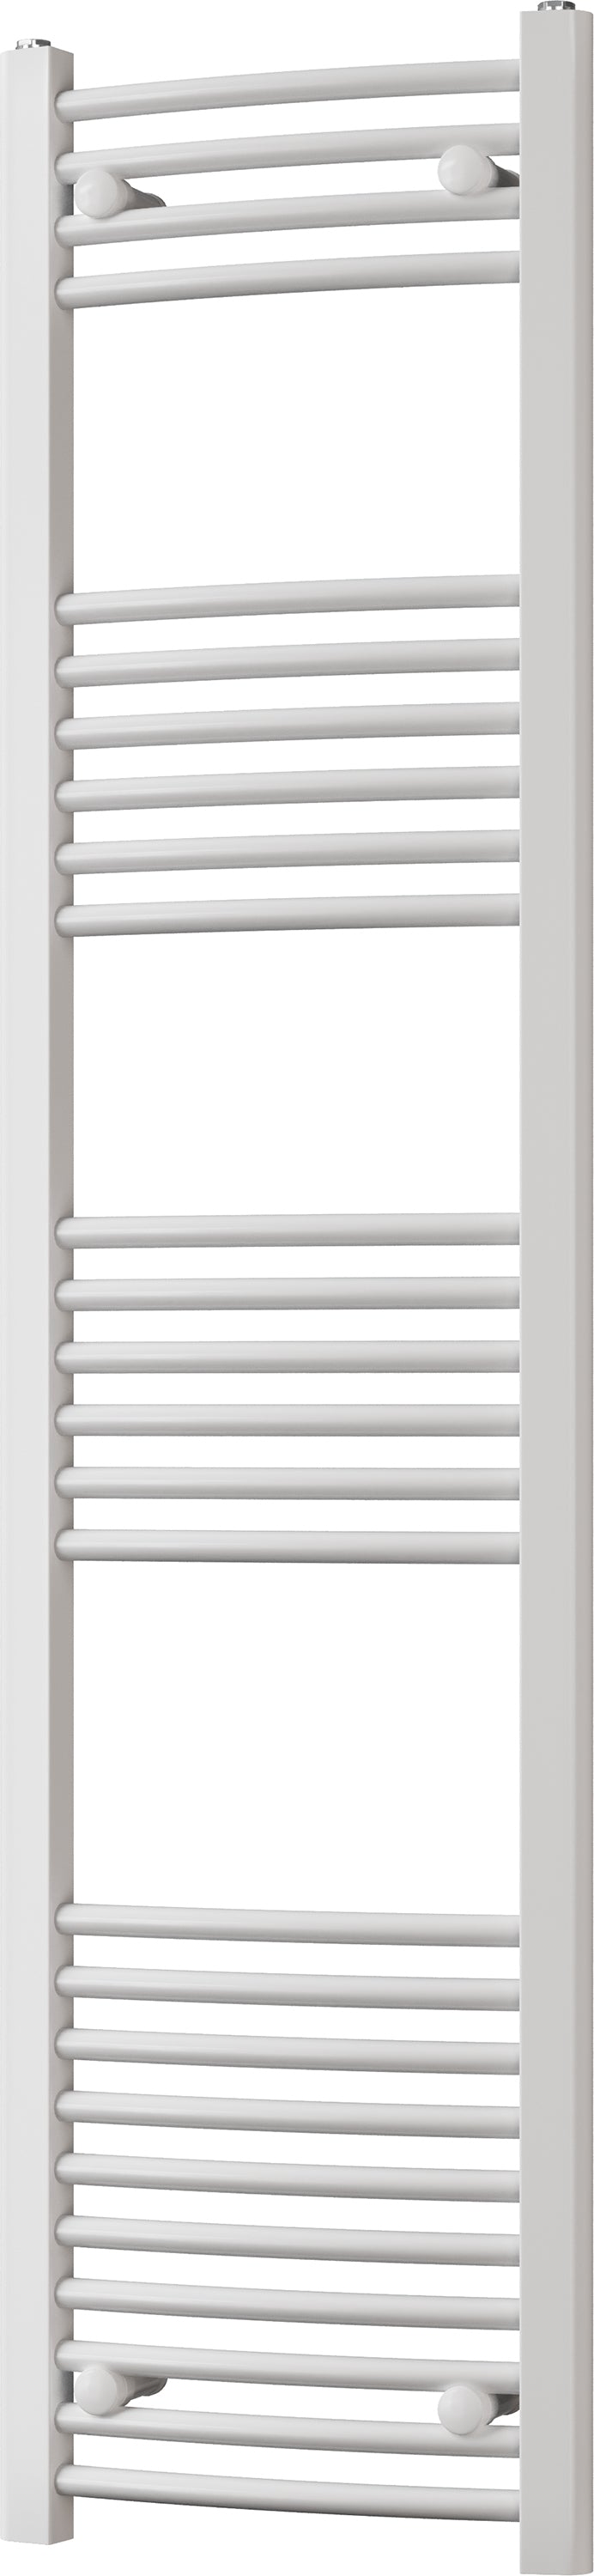 Zennor - White Heated Towel Rail - H1600mm x W400mm - Curved